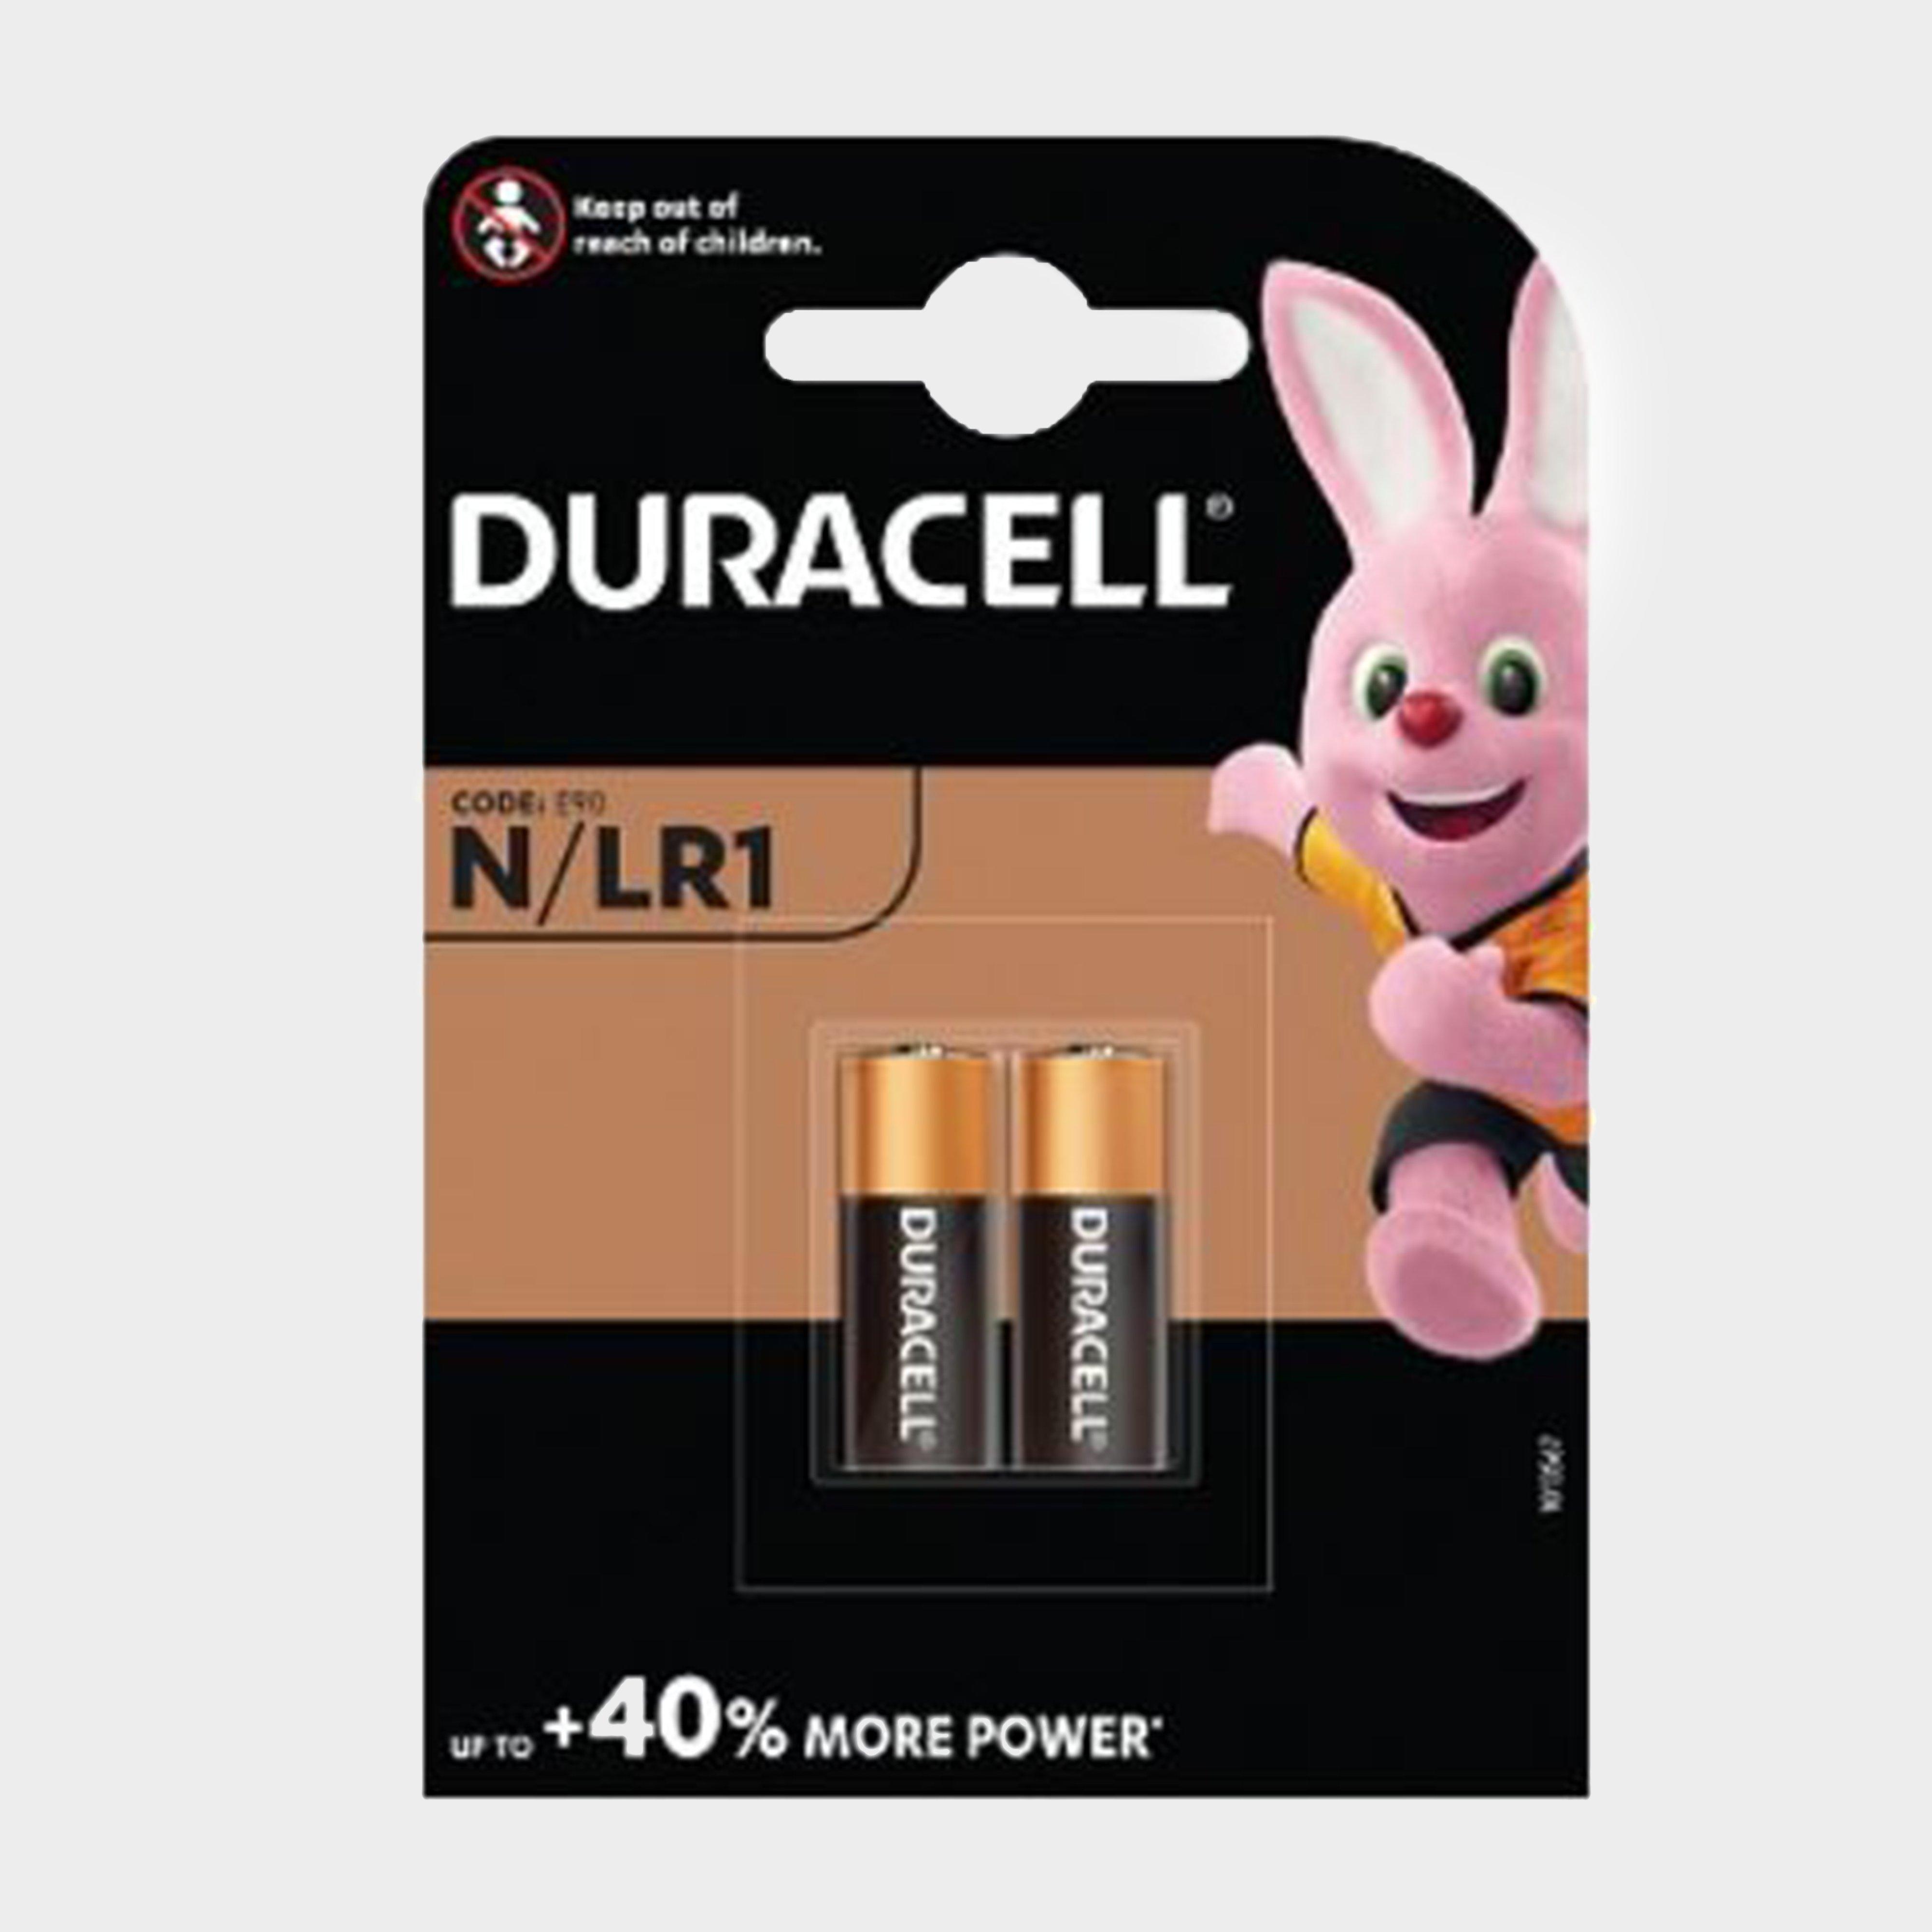 Image of Duracell N/Lr1 Batteries - 2 Pack, PAC